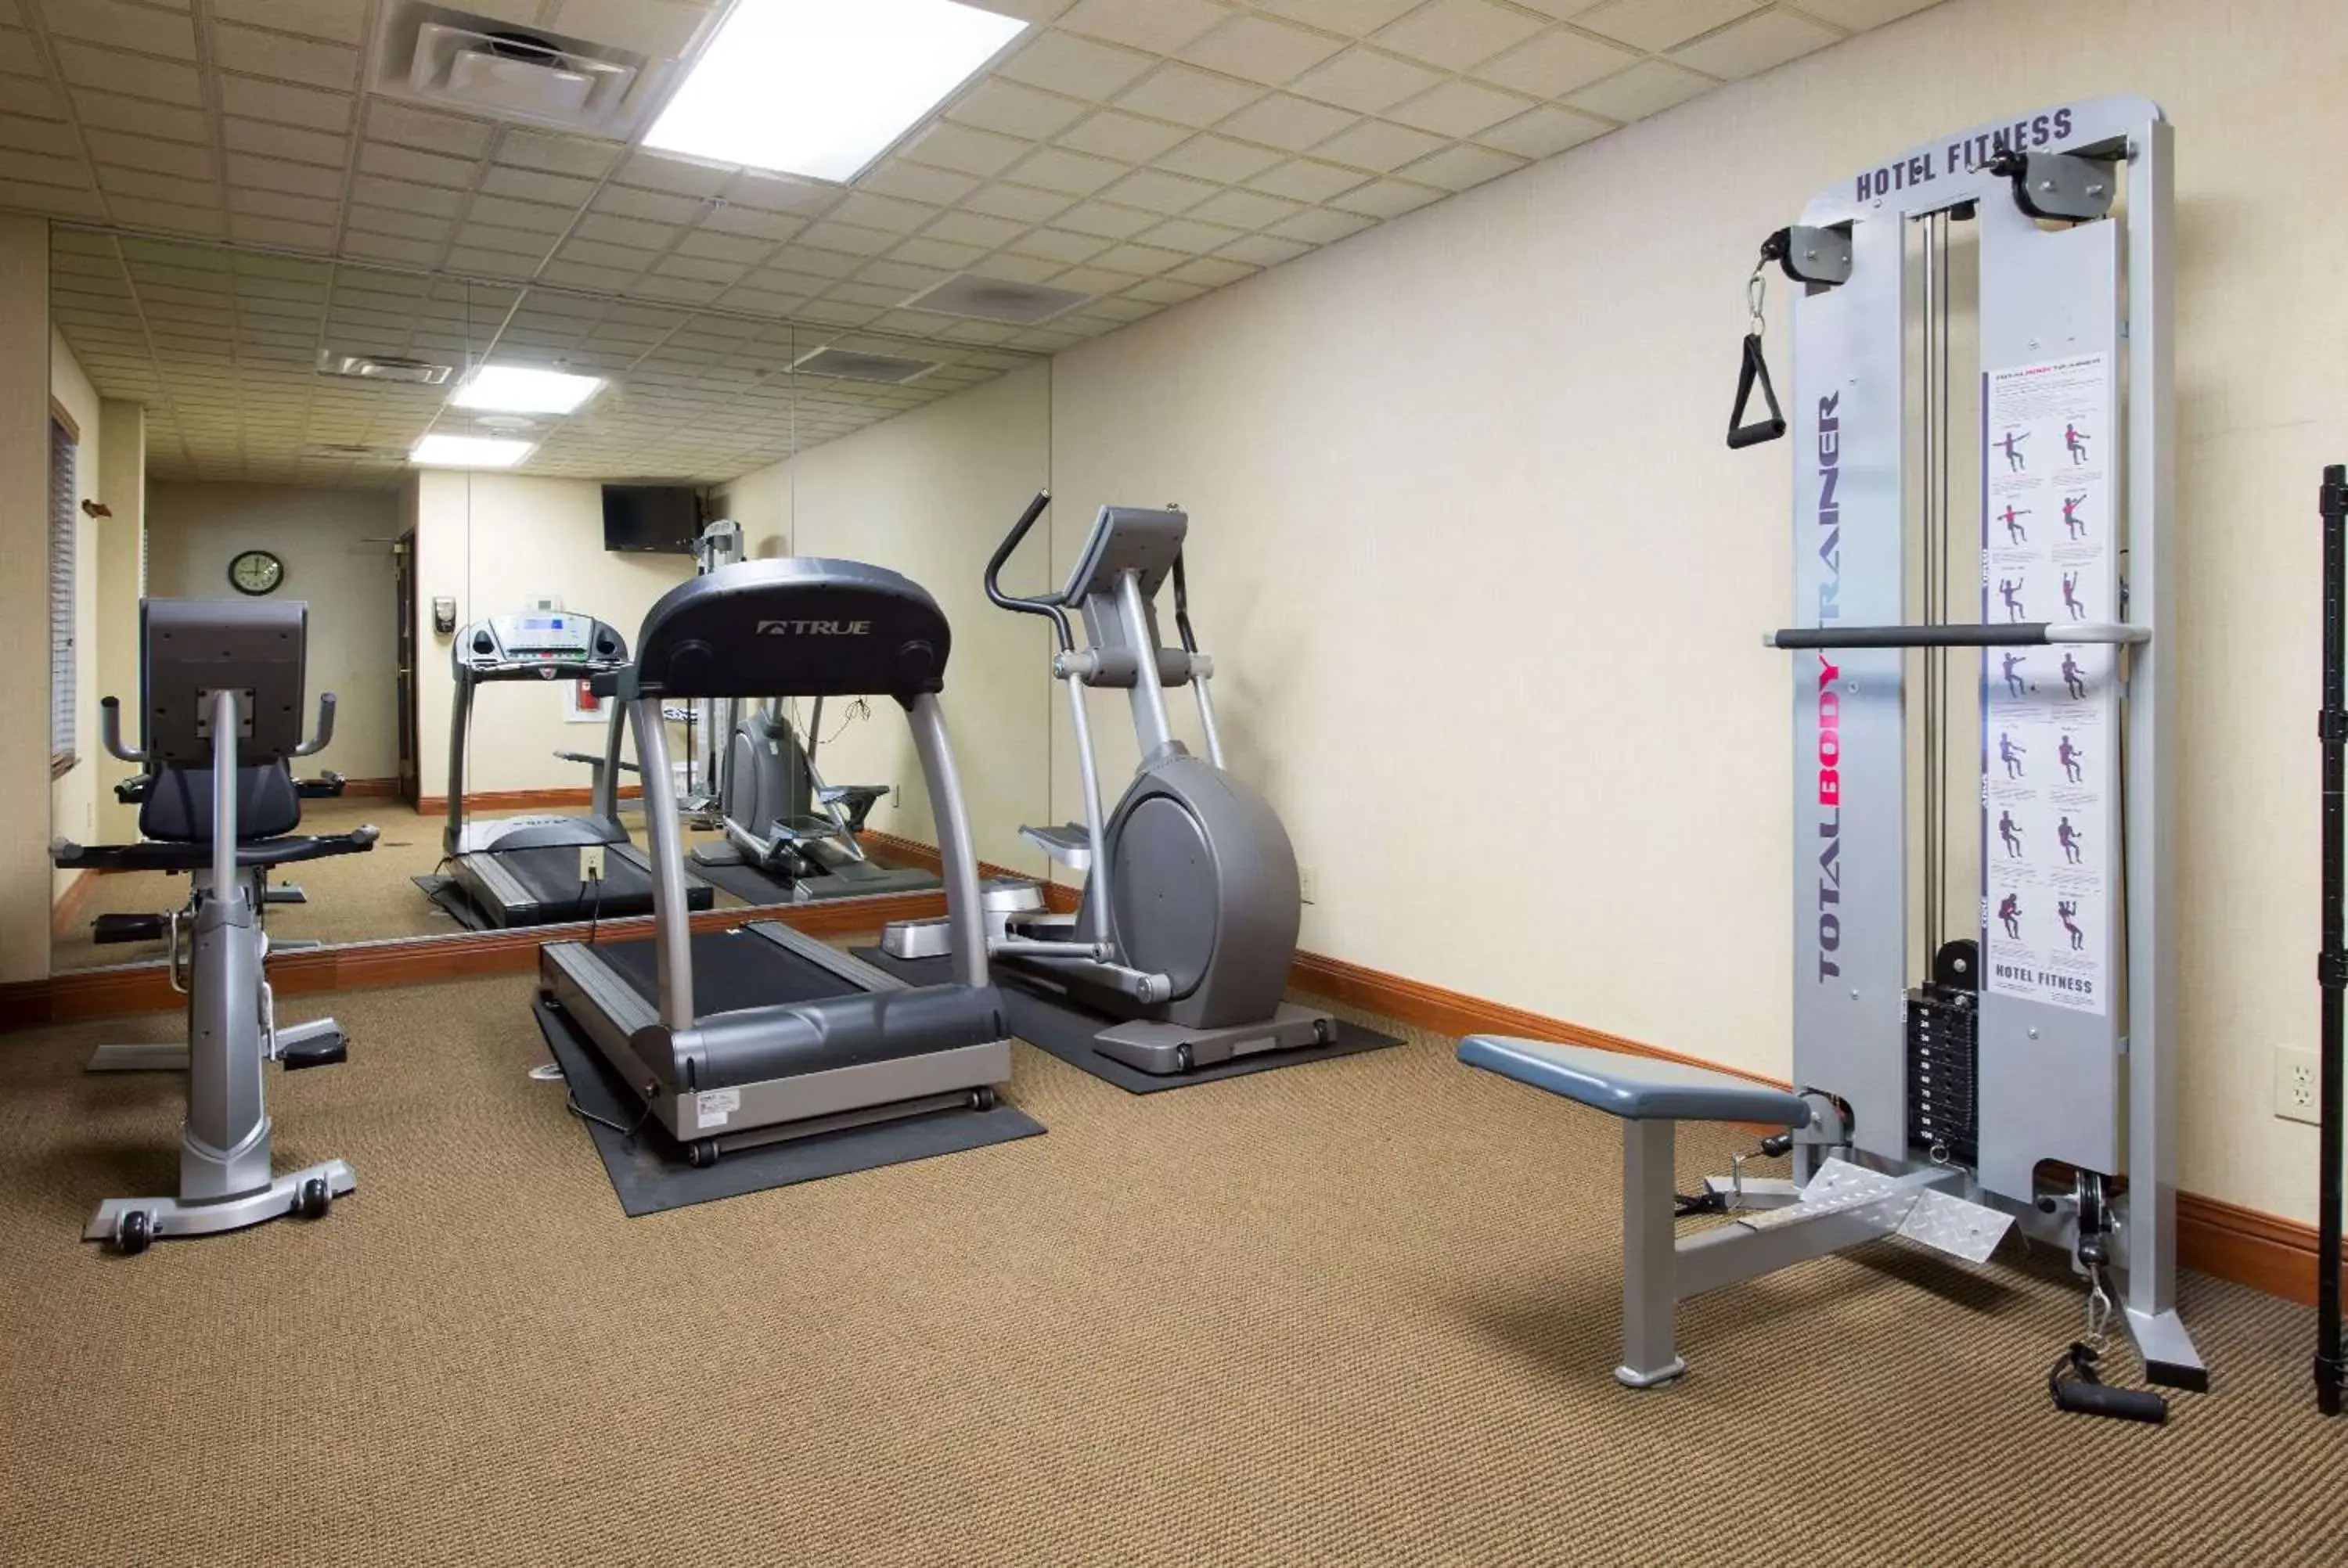 Fitness centre/facilities, Fitness Center/Facilities in Wingate by Wyndham Erlanger - Florence - Cincinnati South